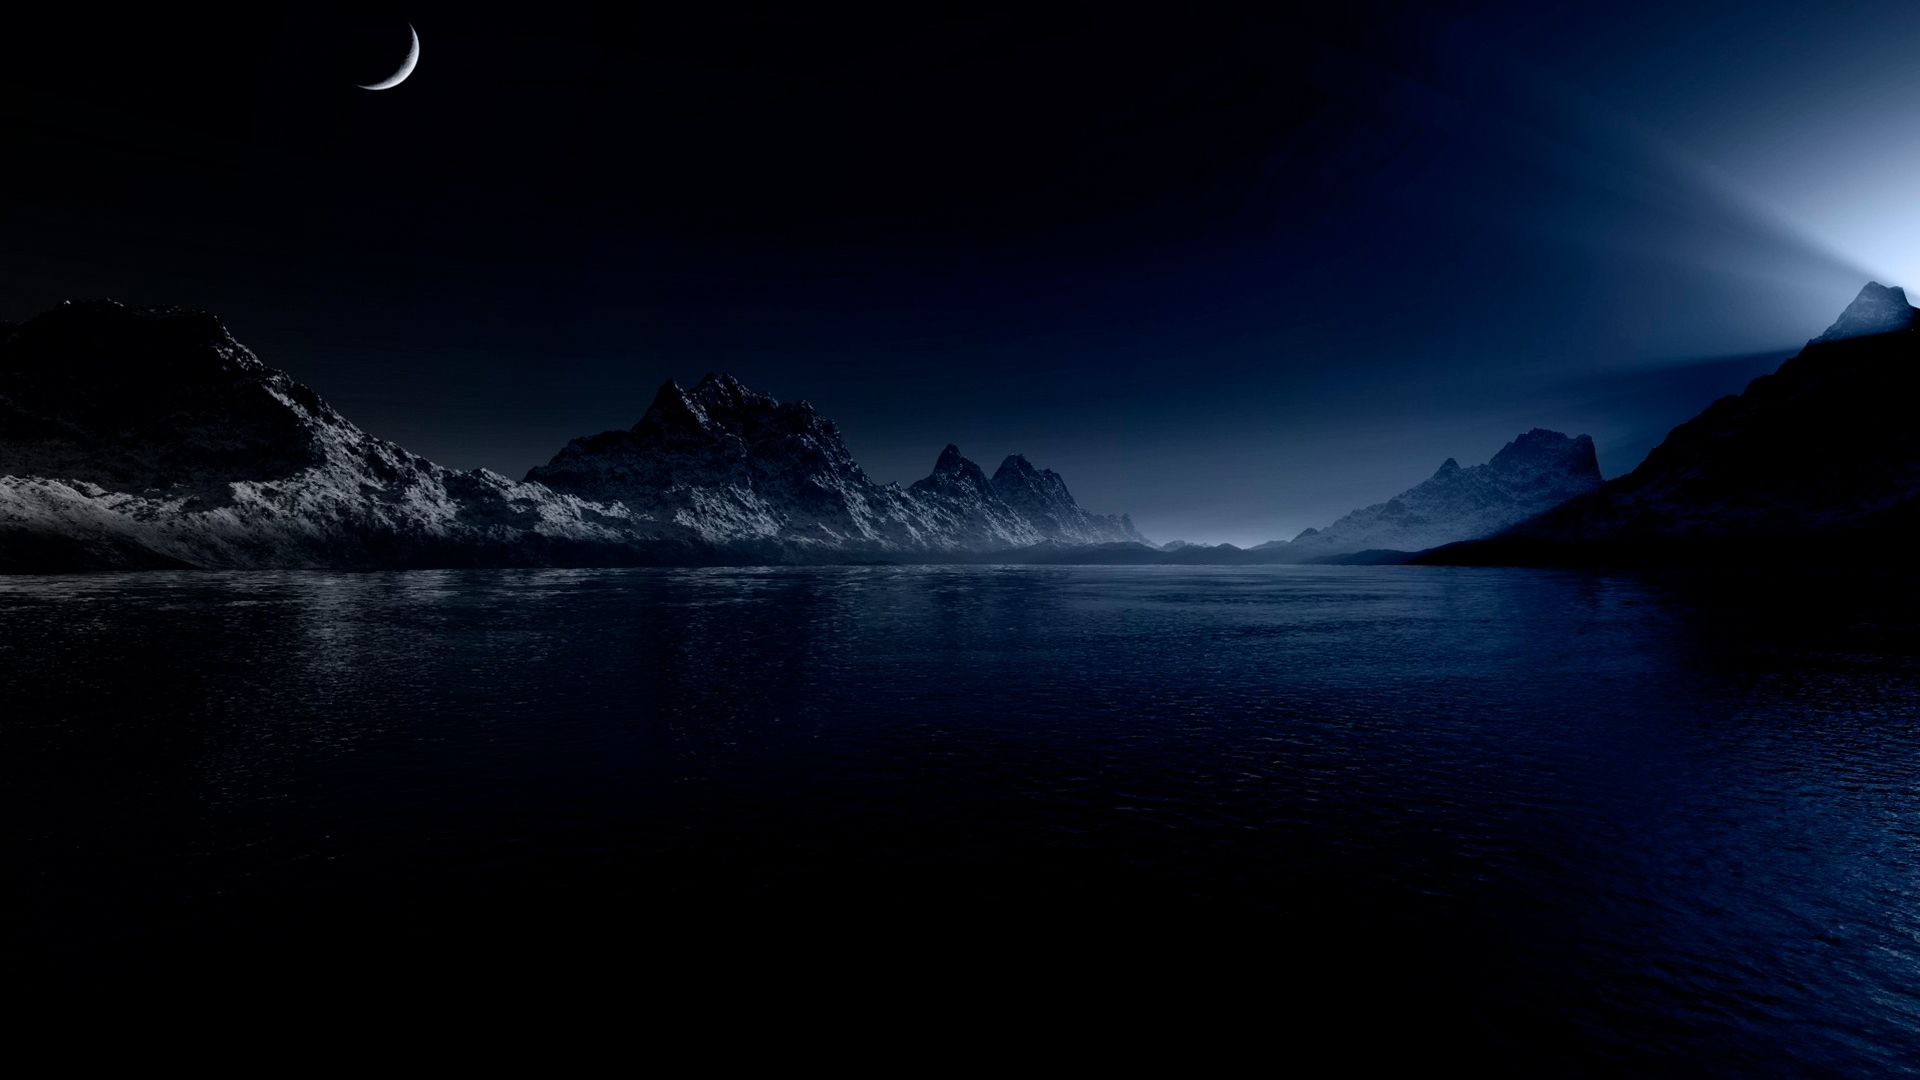 A dark night with a half moon and stars above a lake and mountains - Night